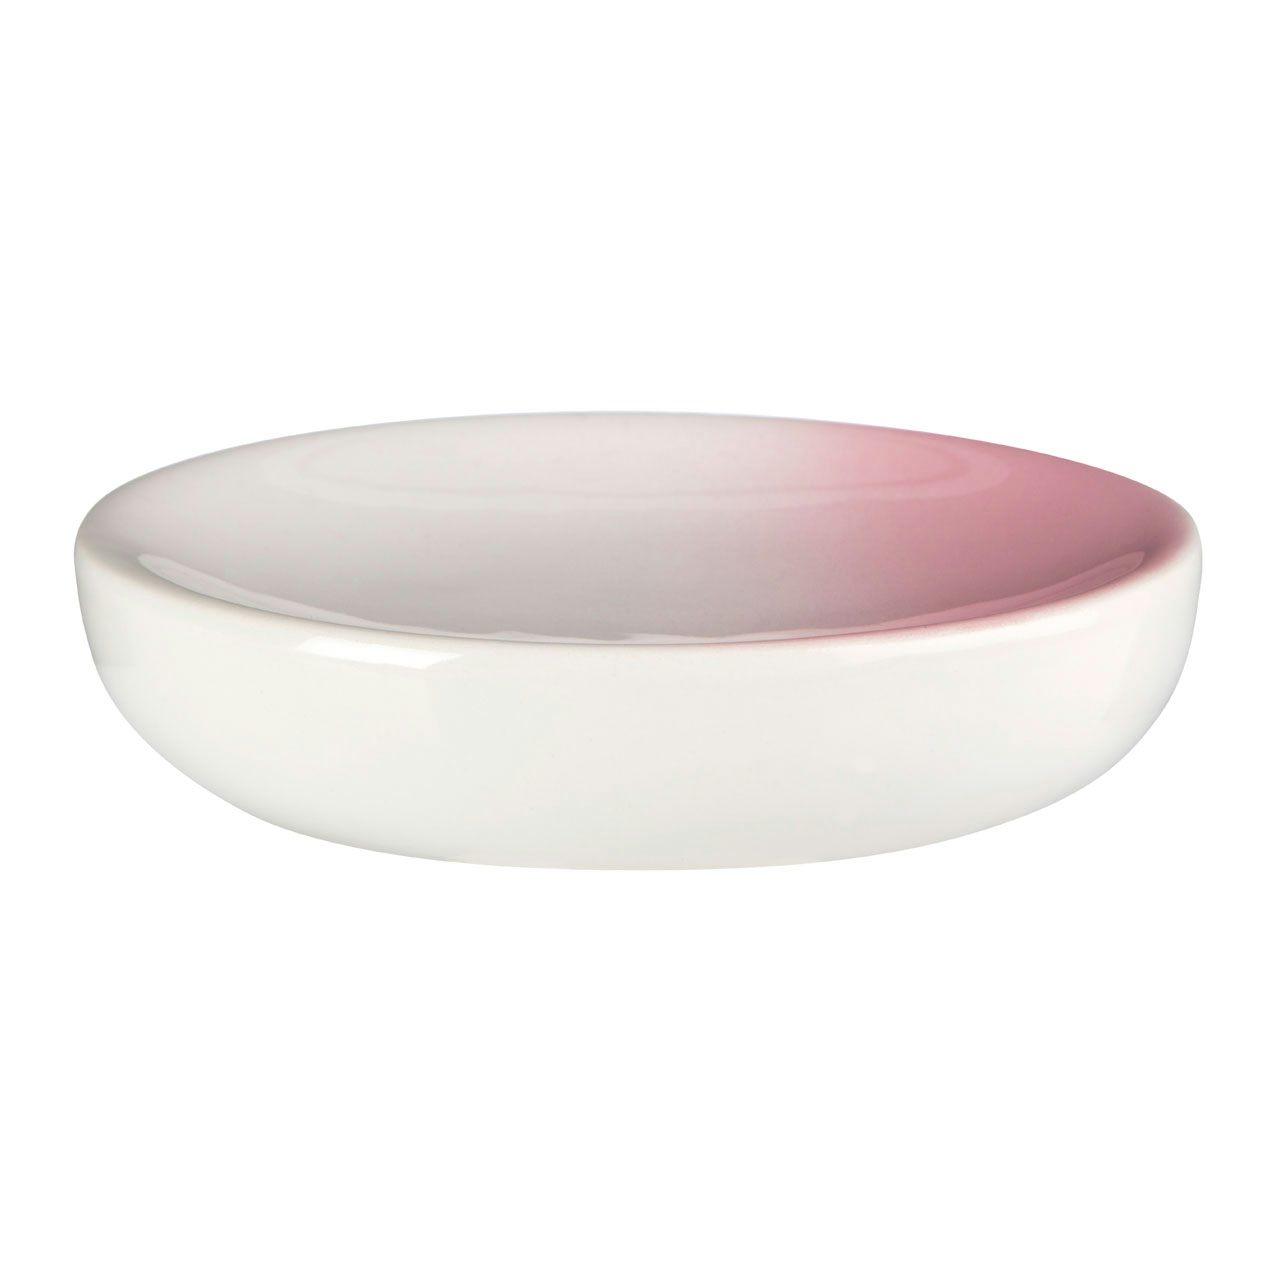 Accents Sunrise dolomite white and pink ombre soap dish